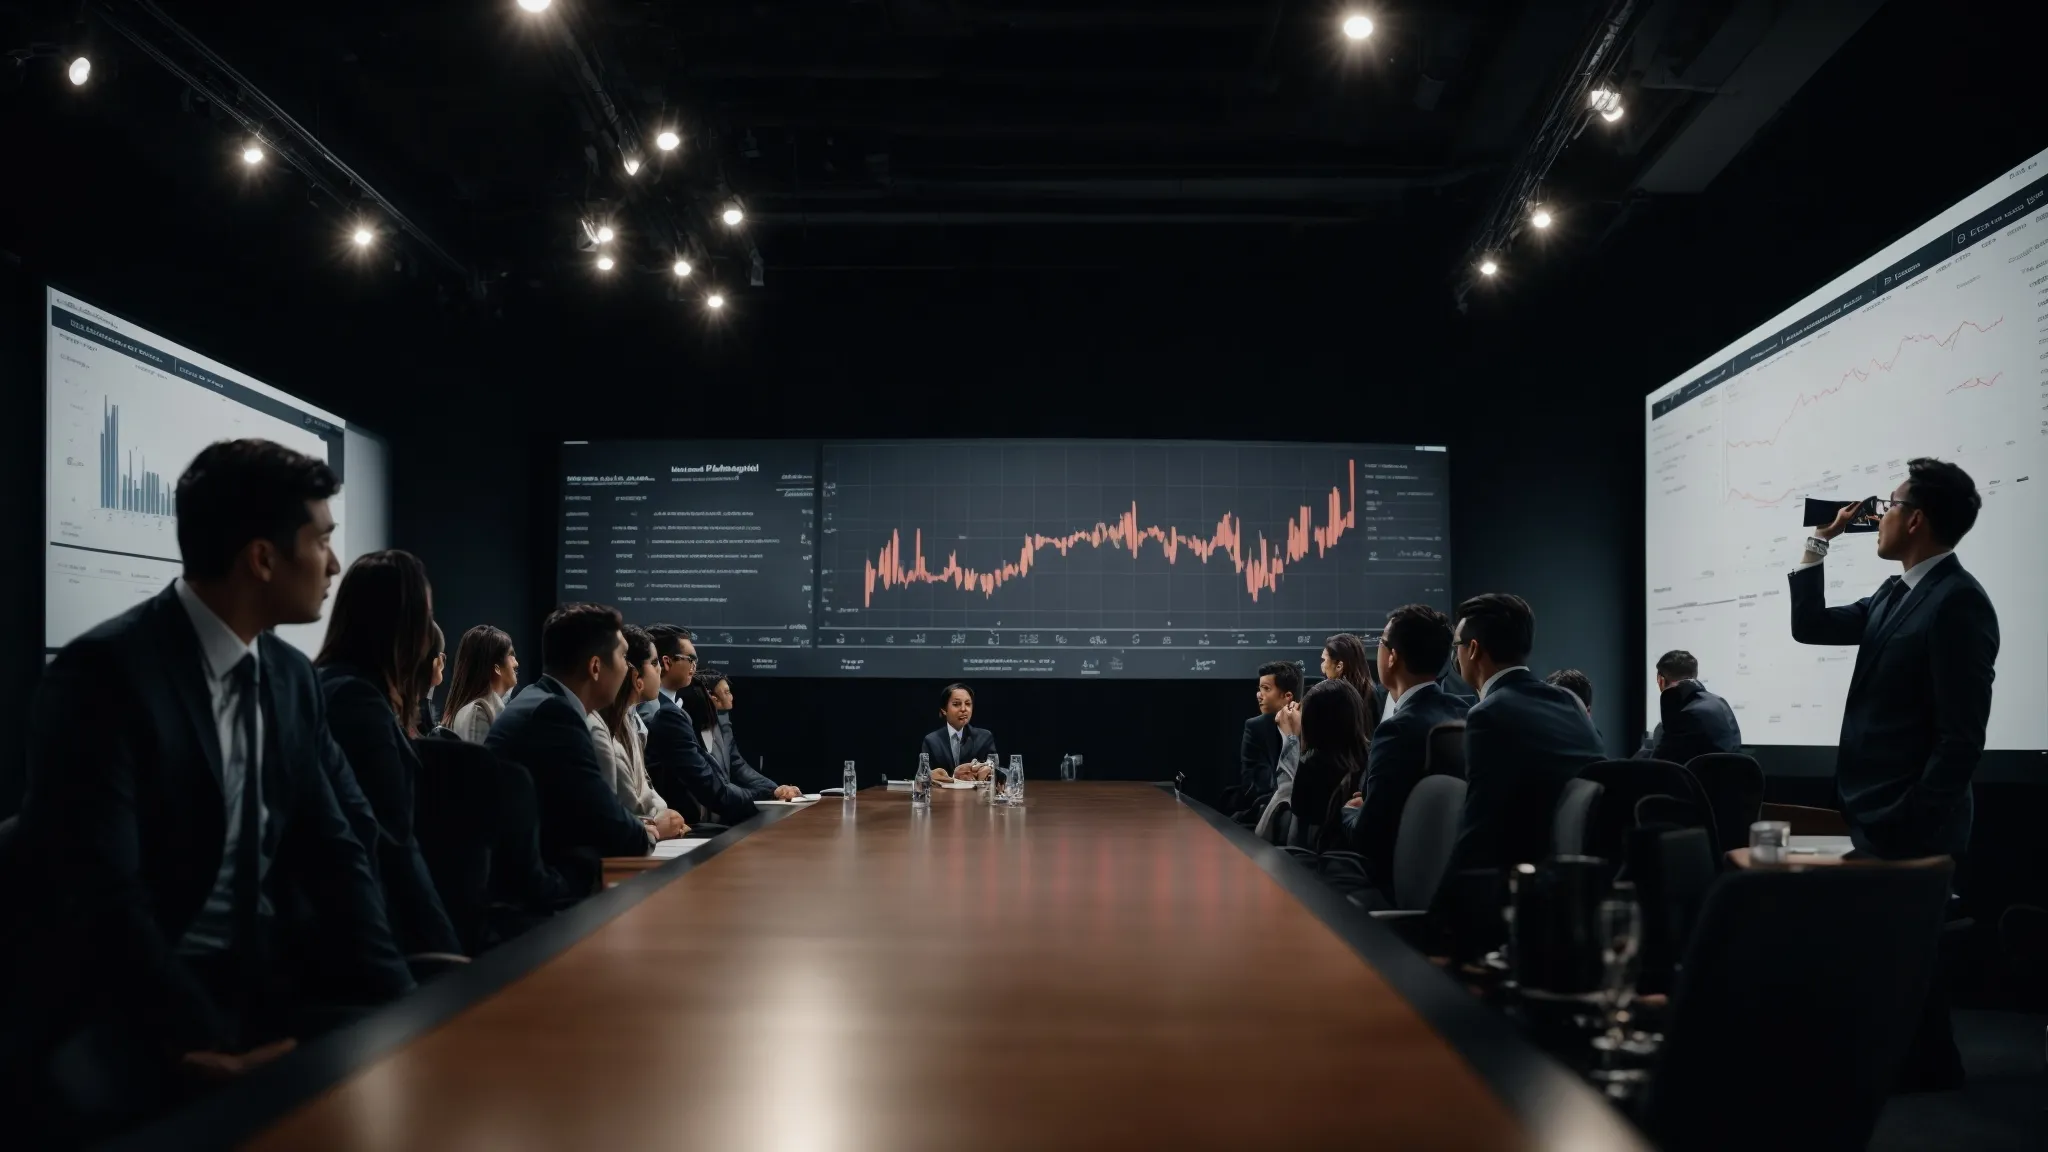 a professional meeting where a presentation on a screen shows growth charts and analytics data.